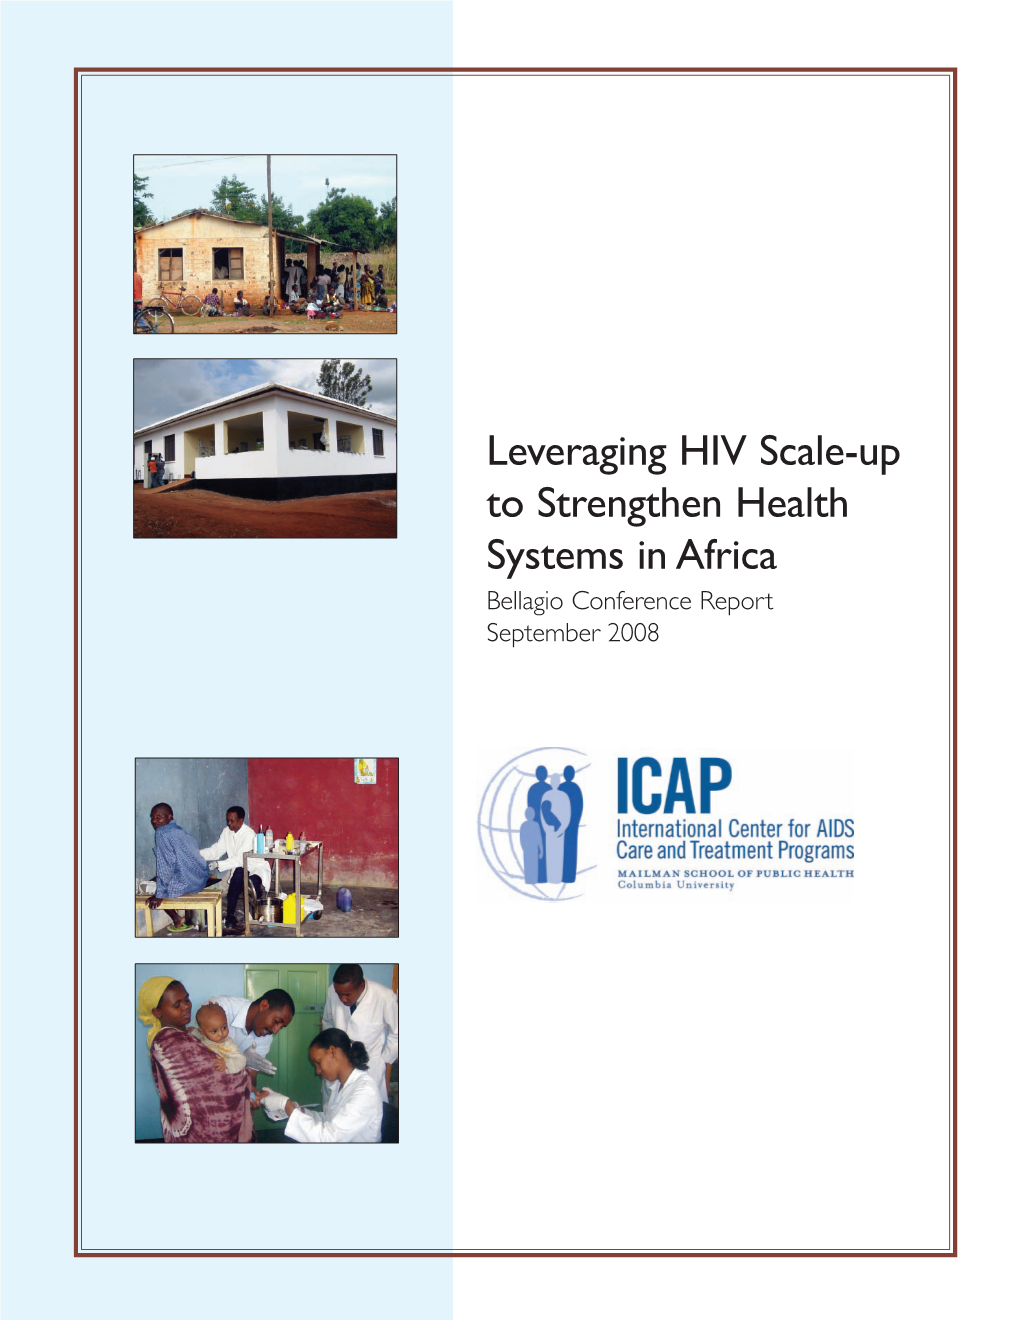 Leveraging HIV Scale-Up to Strengthen Health Systems in Africa